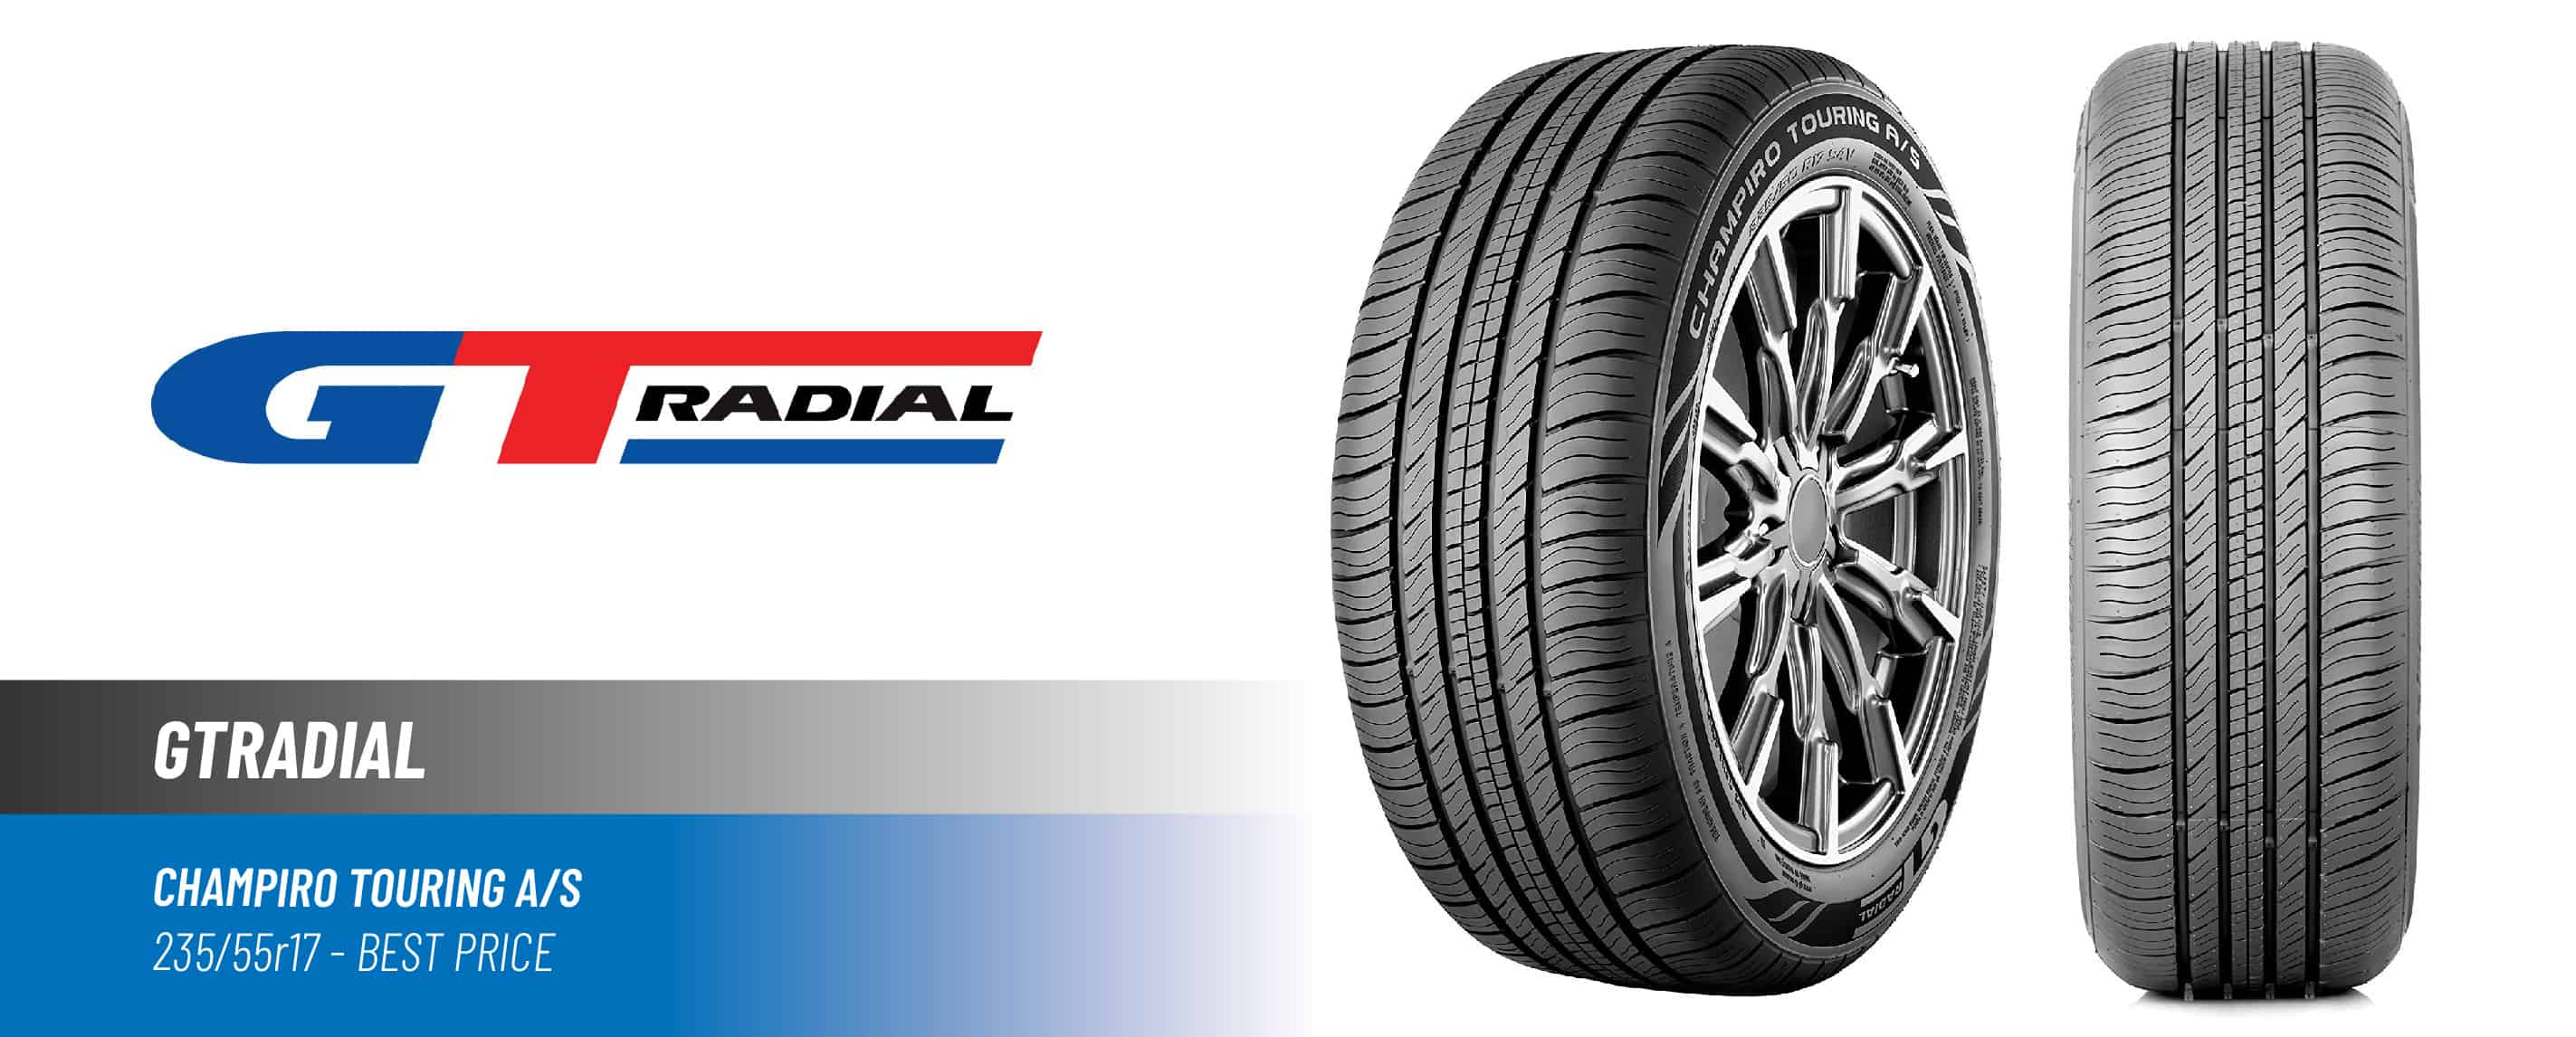 Top#2 Best Price: GTRadial Champiro Touring A/S –best 235/55 R17